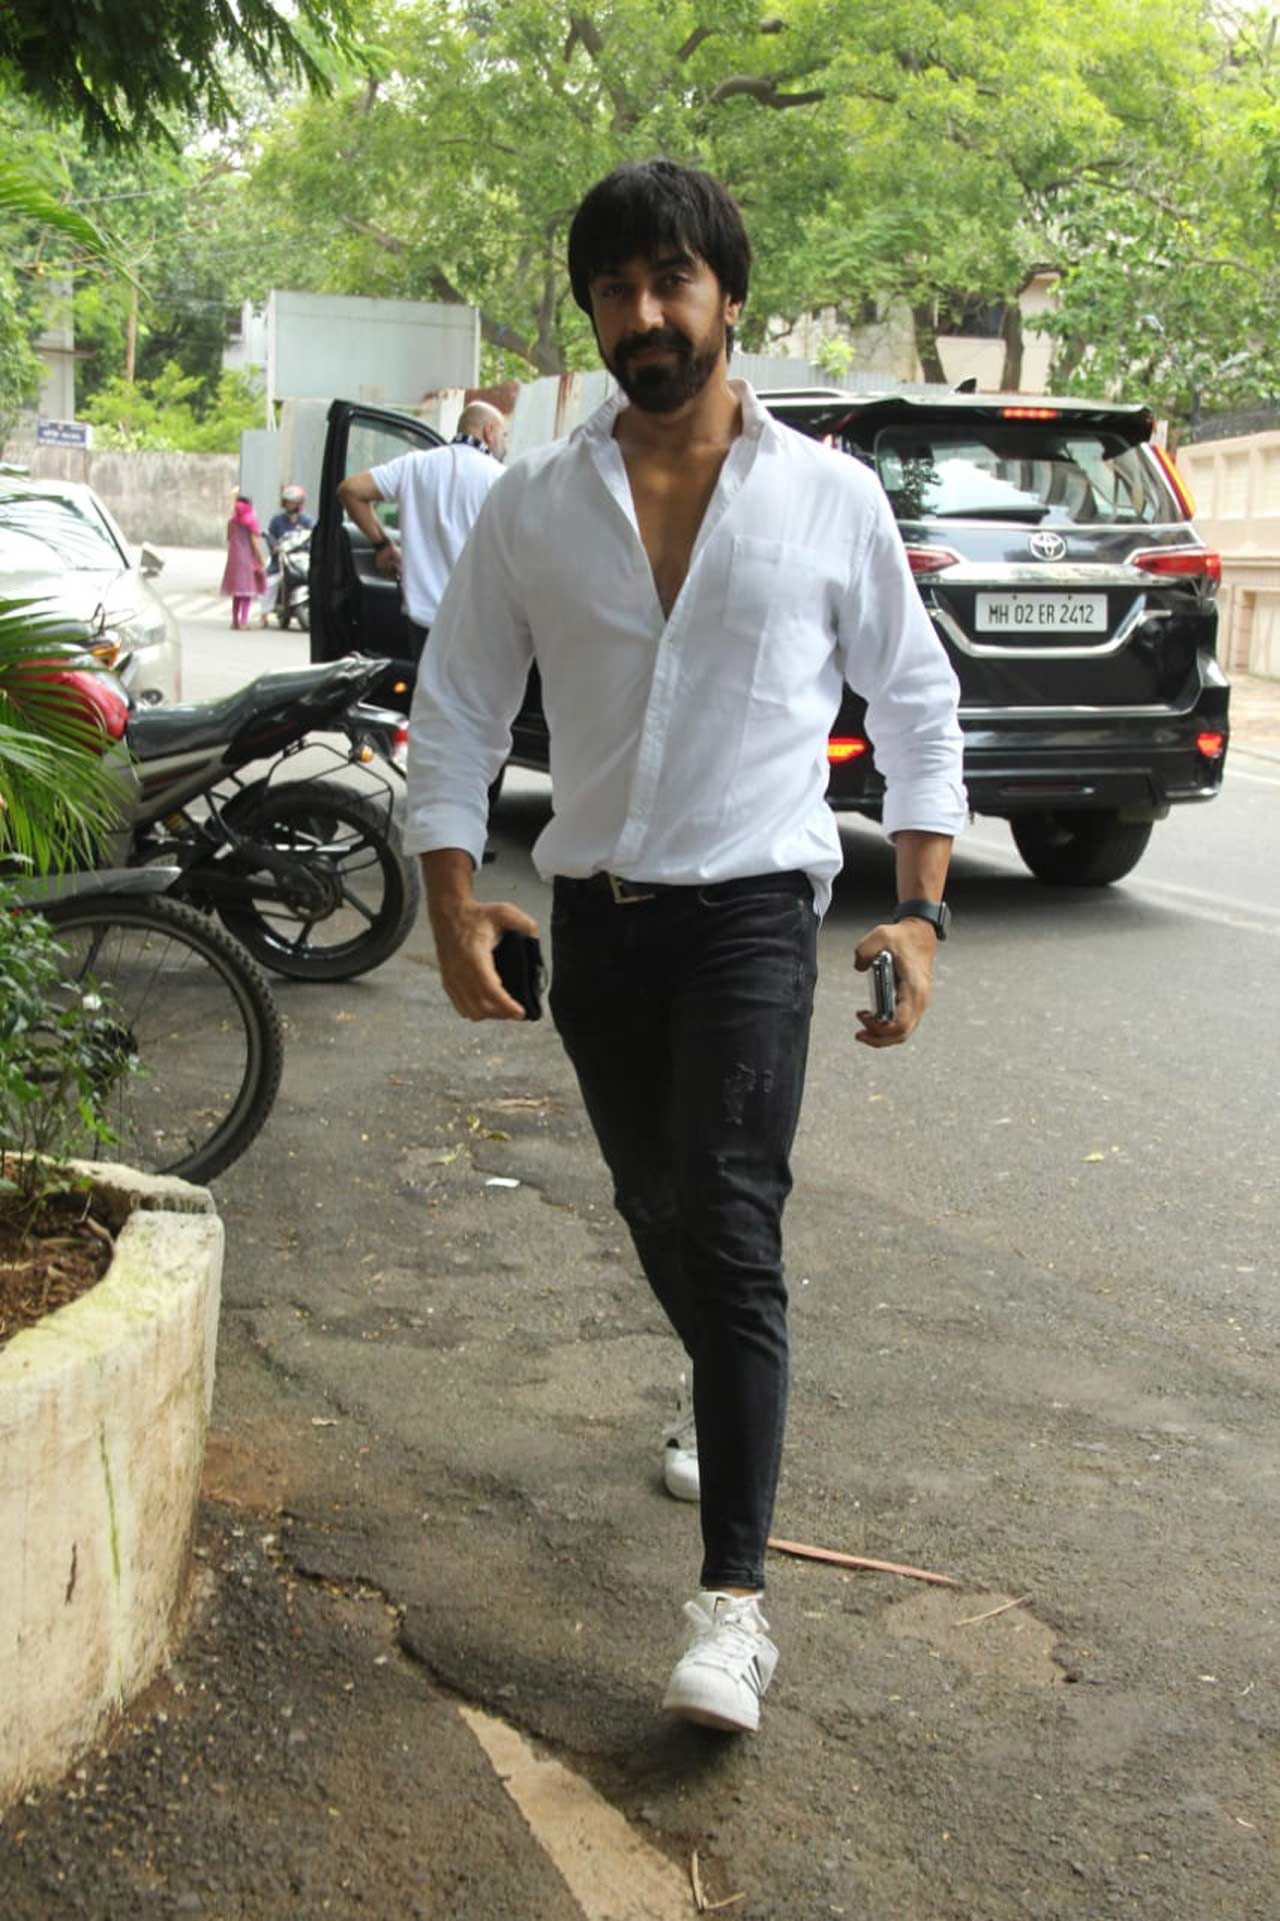 Bollywood celebrities visited Mandira Bedi's house to mourn the demise of filmmaker Raj Kaushal. The filmmaker passed away early Wednesday morning following a heart attack. He was in his 50s. Kaushal was married to actor-TV presenter Mandira Bedi. The couple has two children, son Vir and daughter Tara.. In picture: Ashish Chowdhry attended the prayer meet hosted at their residence in Bandra. (All pictures/Yogen Shah)